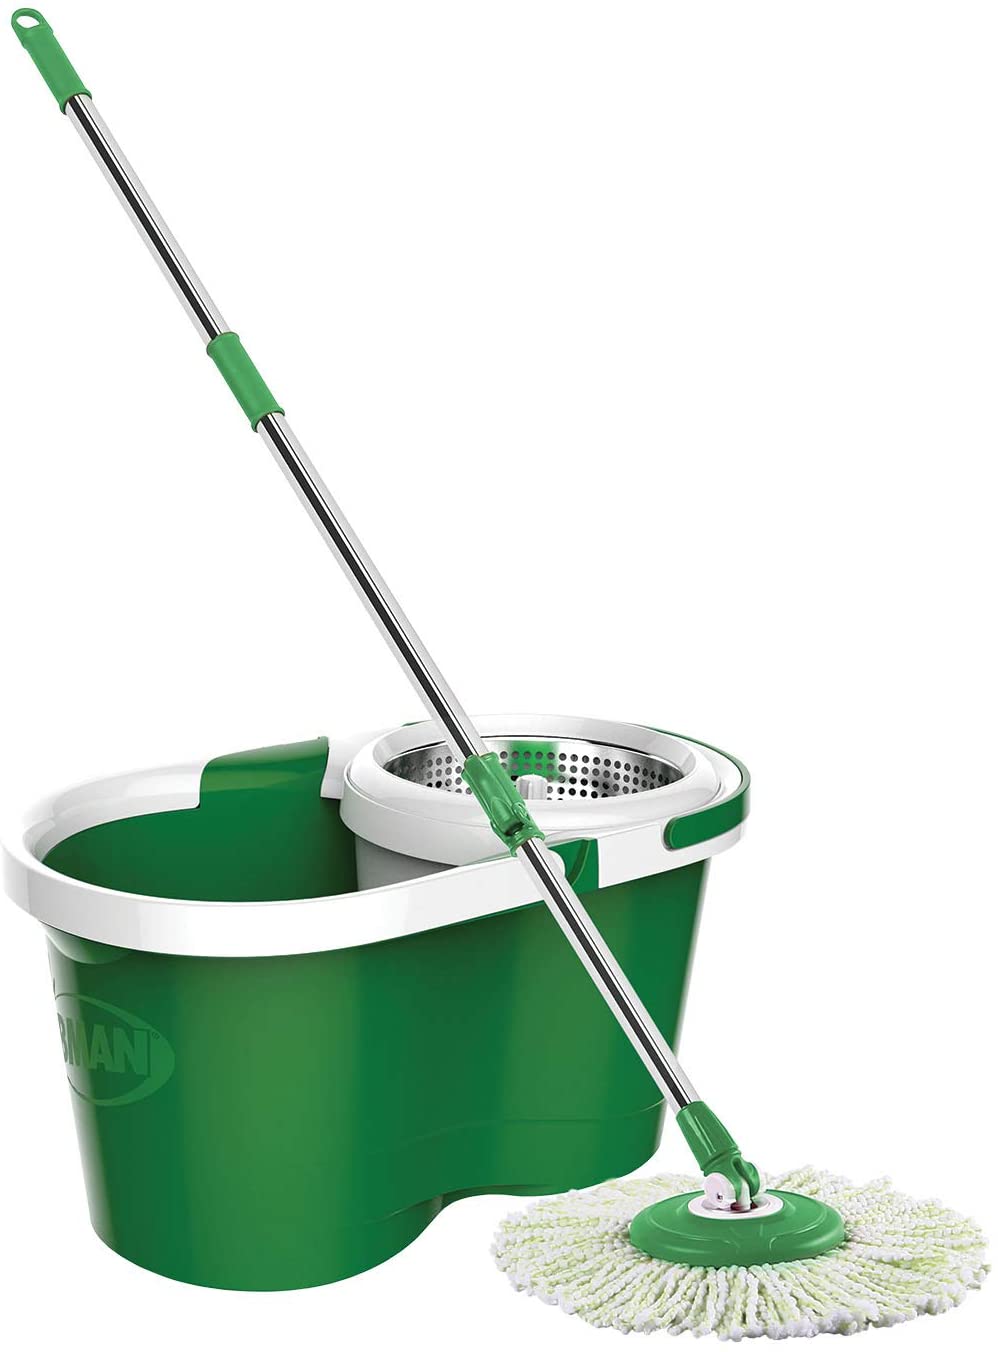 Libman Microfiber Mophead and Stainless Steel Compartment Spin Mop and Bucket